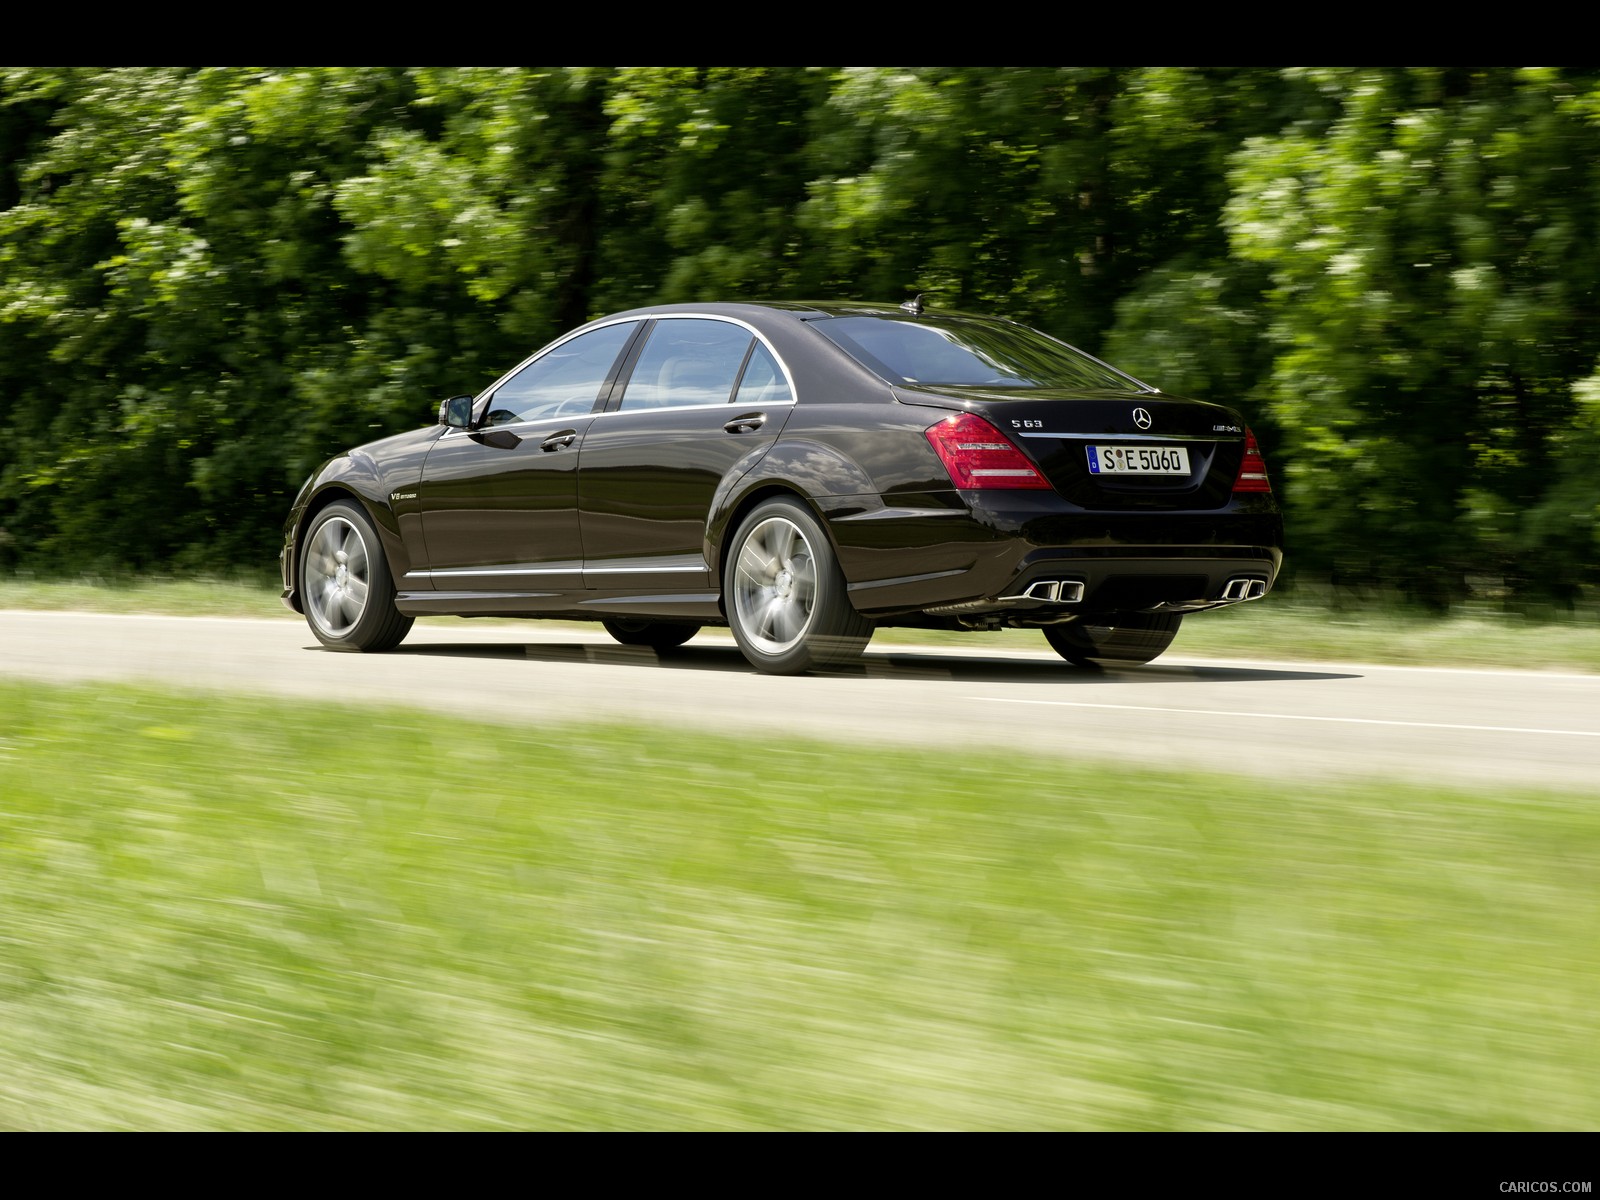 Mercedes-Benz S63 AMG (2011)  - Rear , #18 of 34